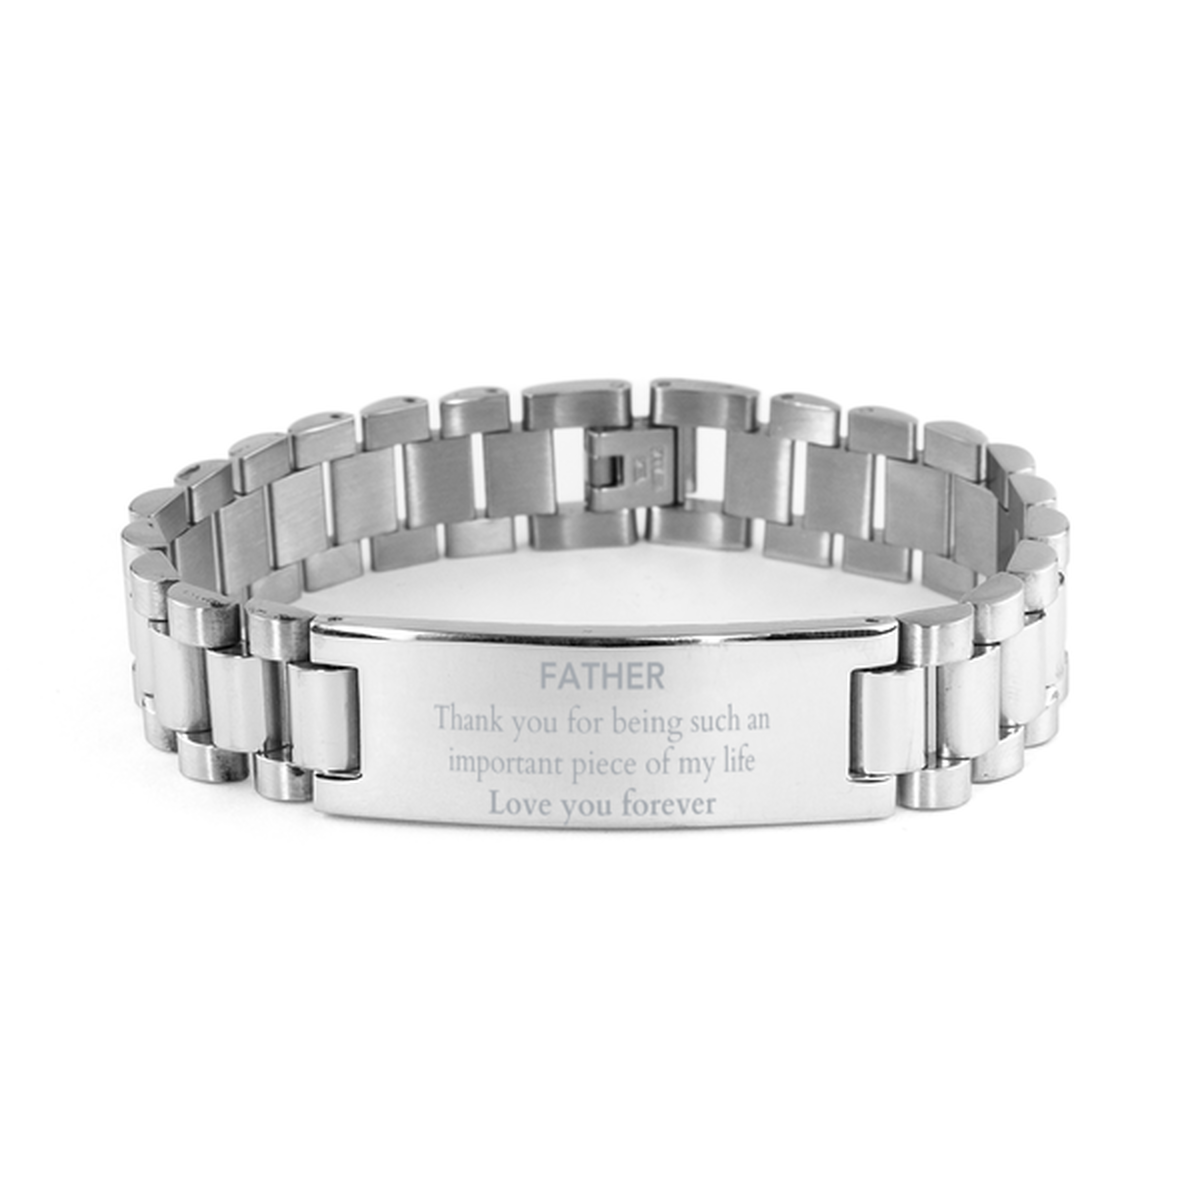 Appropriate Father Ladder Stainless Steel Bracelet Epic Birthday Gifts for Father Thank you for being such an important piece of my life Father Christmas Mothers Fathers Day